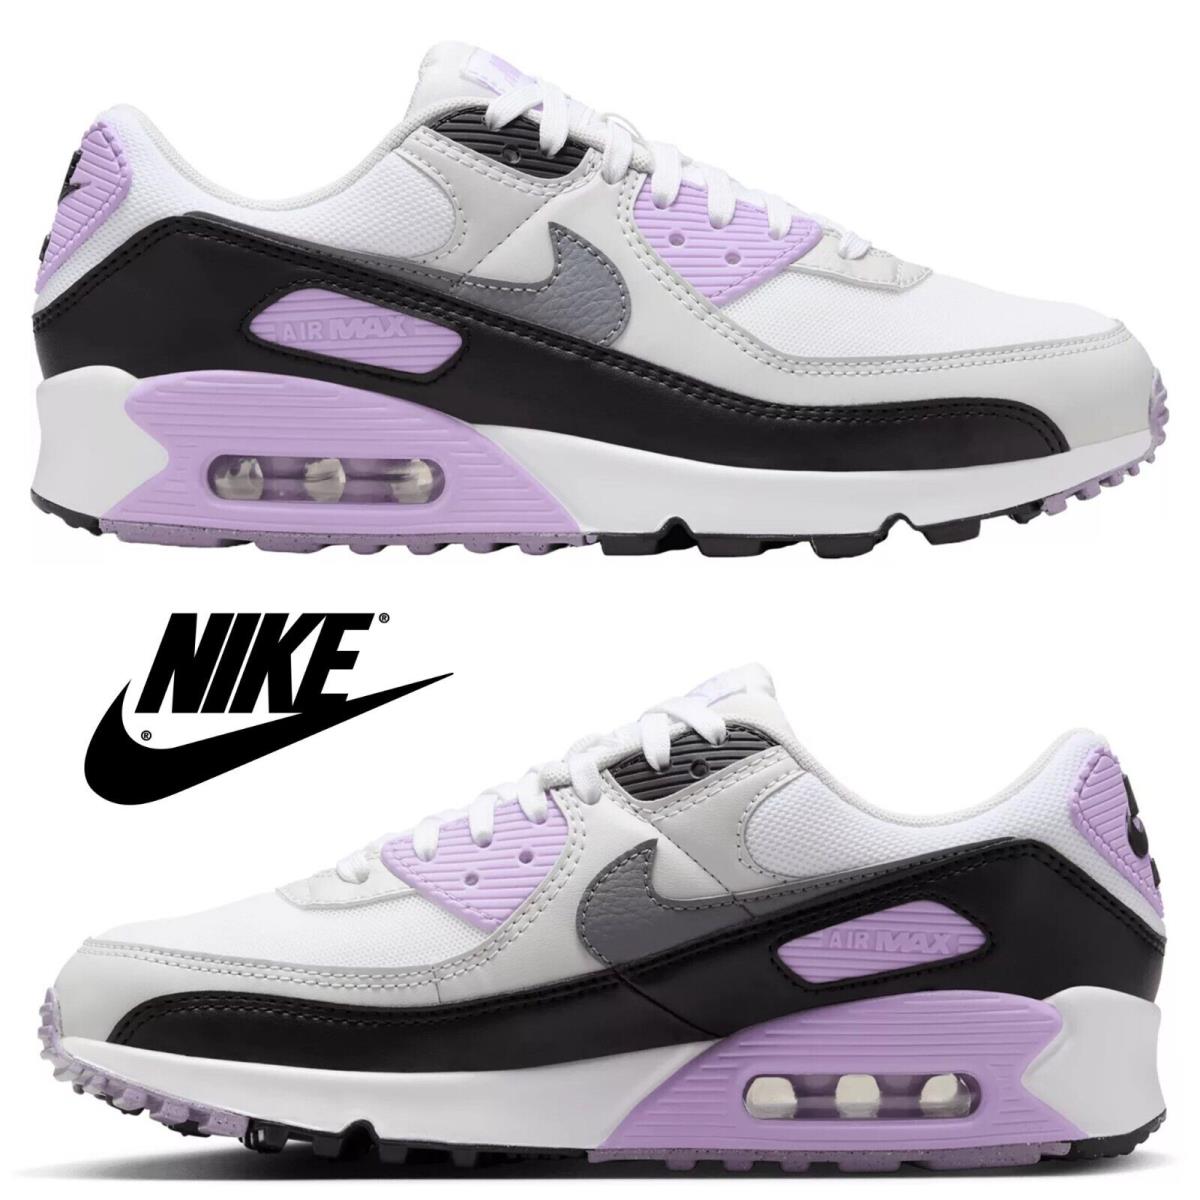 Nike Air Max 90 Women`s Sneakers Sport Running Gym Comfort Athletic Shoes